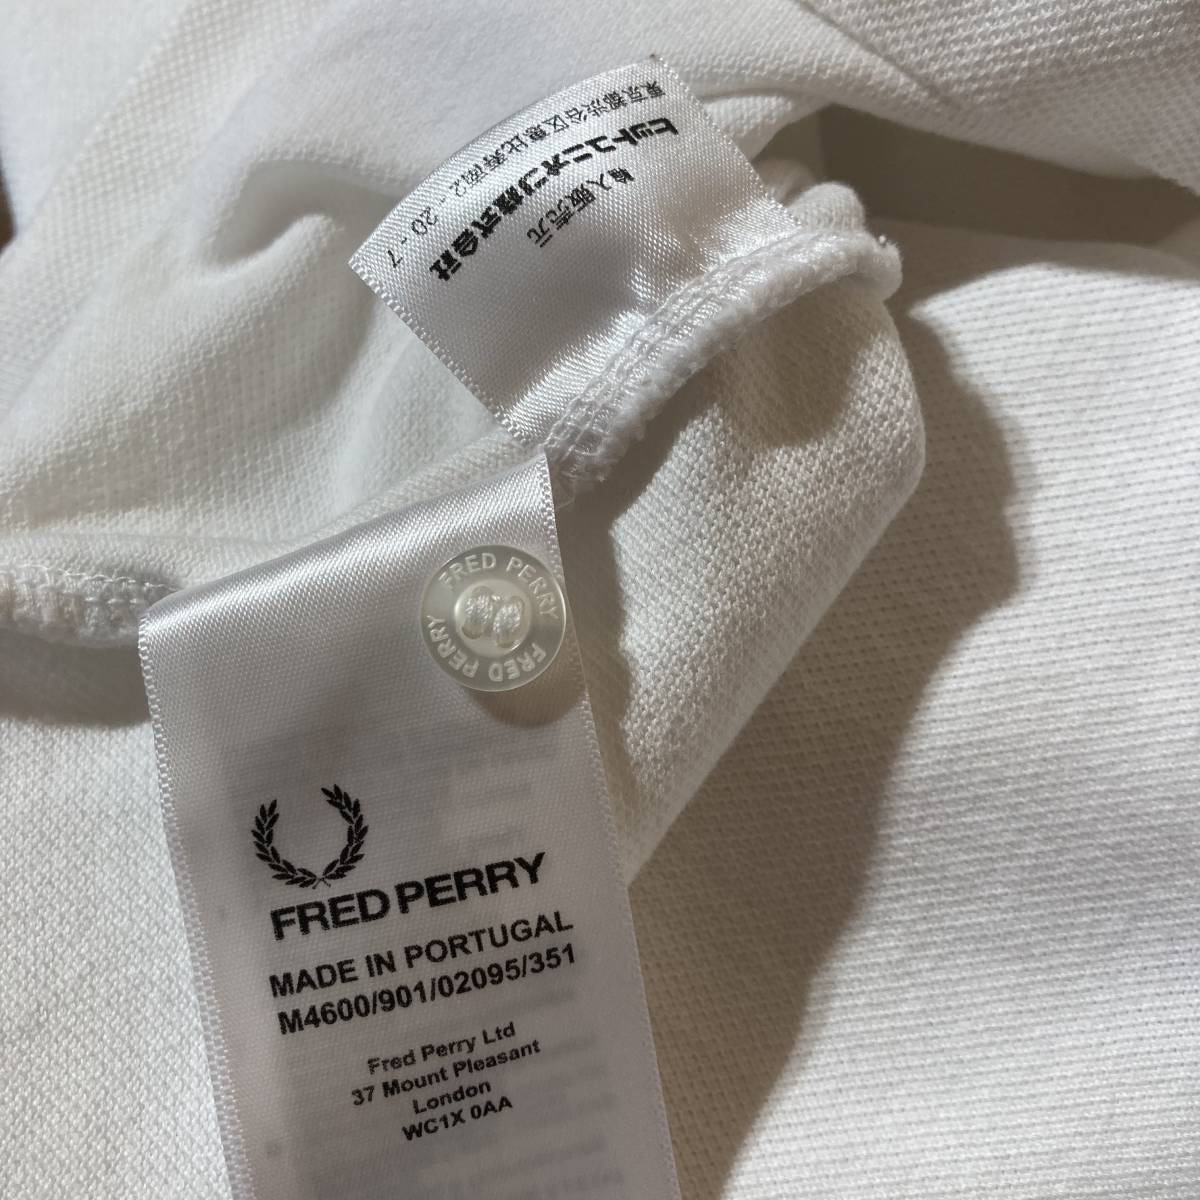 FRED PERRY POCCNR ポロシャツ S コラボ 別注 限定_画像4